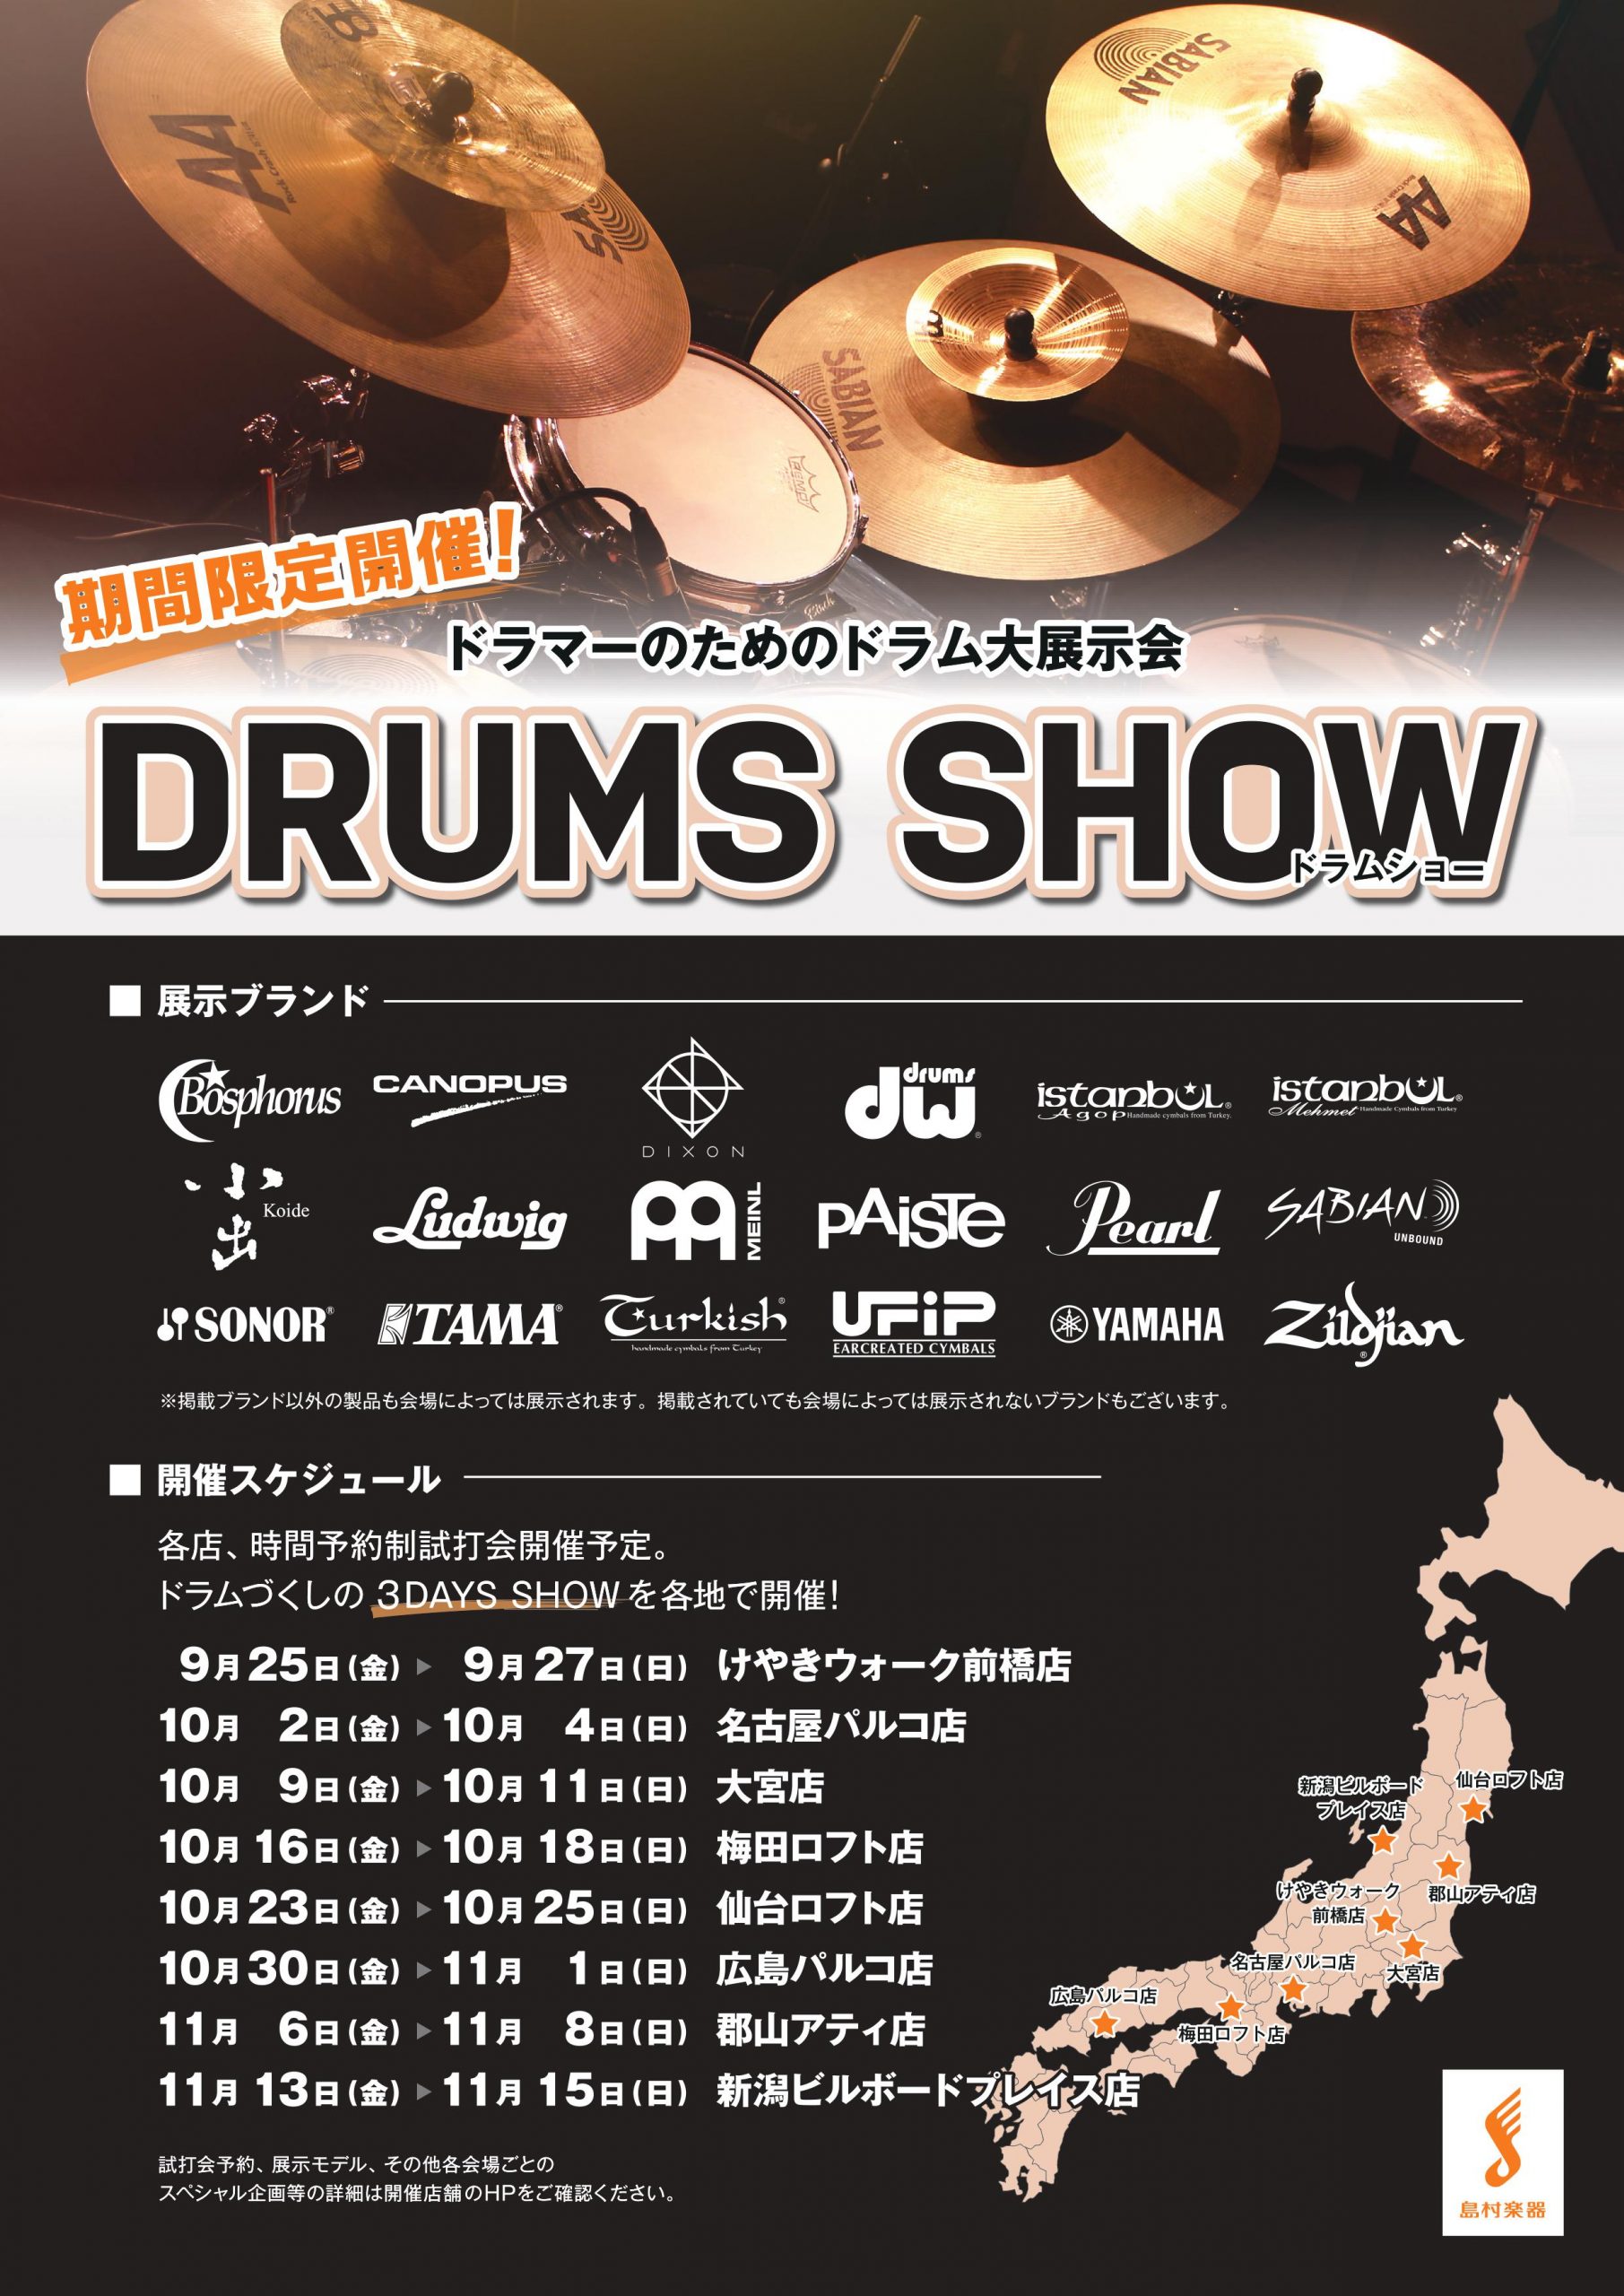 *DRUMS SHOW 2021 ~UNITE~ in 梅田ロフト店 [https://info.shimamura.co.jp/drums/article/drums-show-2021::title=] 国内外のドラム/シンバルメーカー製品を一堂に集めた「試せる」「買える」展示会、島村楽器「DR […]